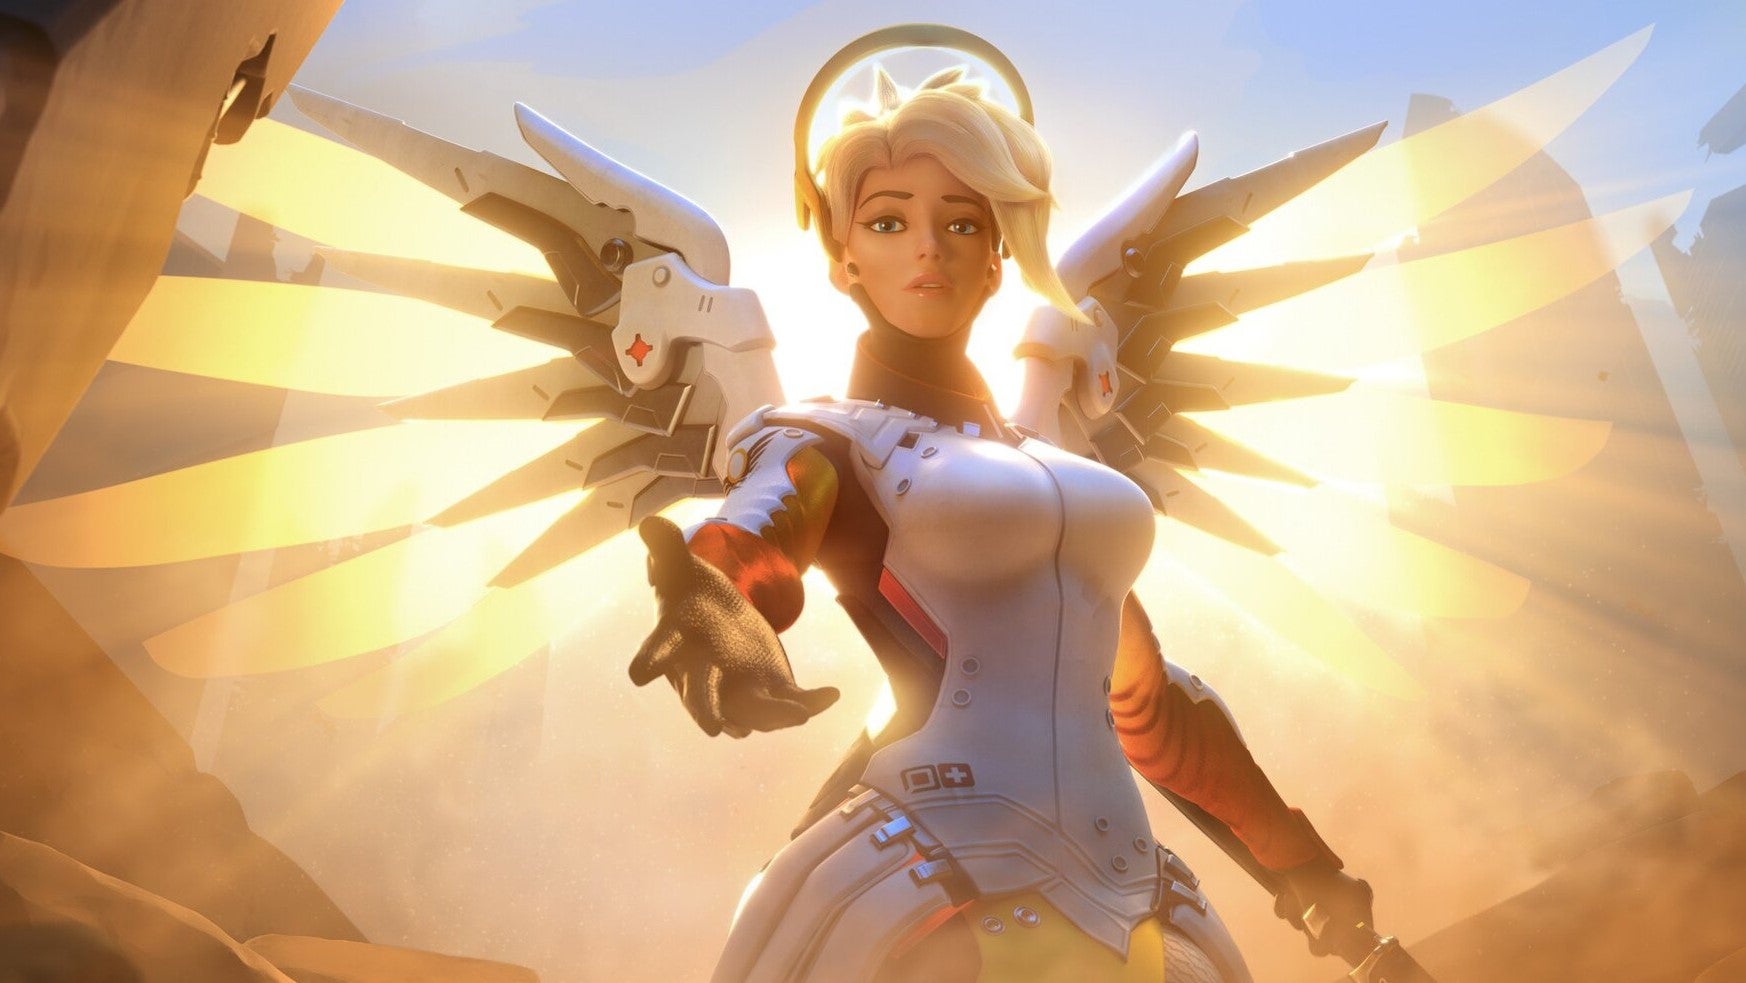 Overwatch hero Mercy, wings out, reaches down to the camera to pull someone up.